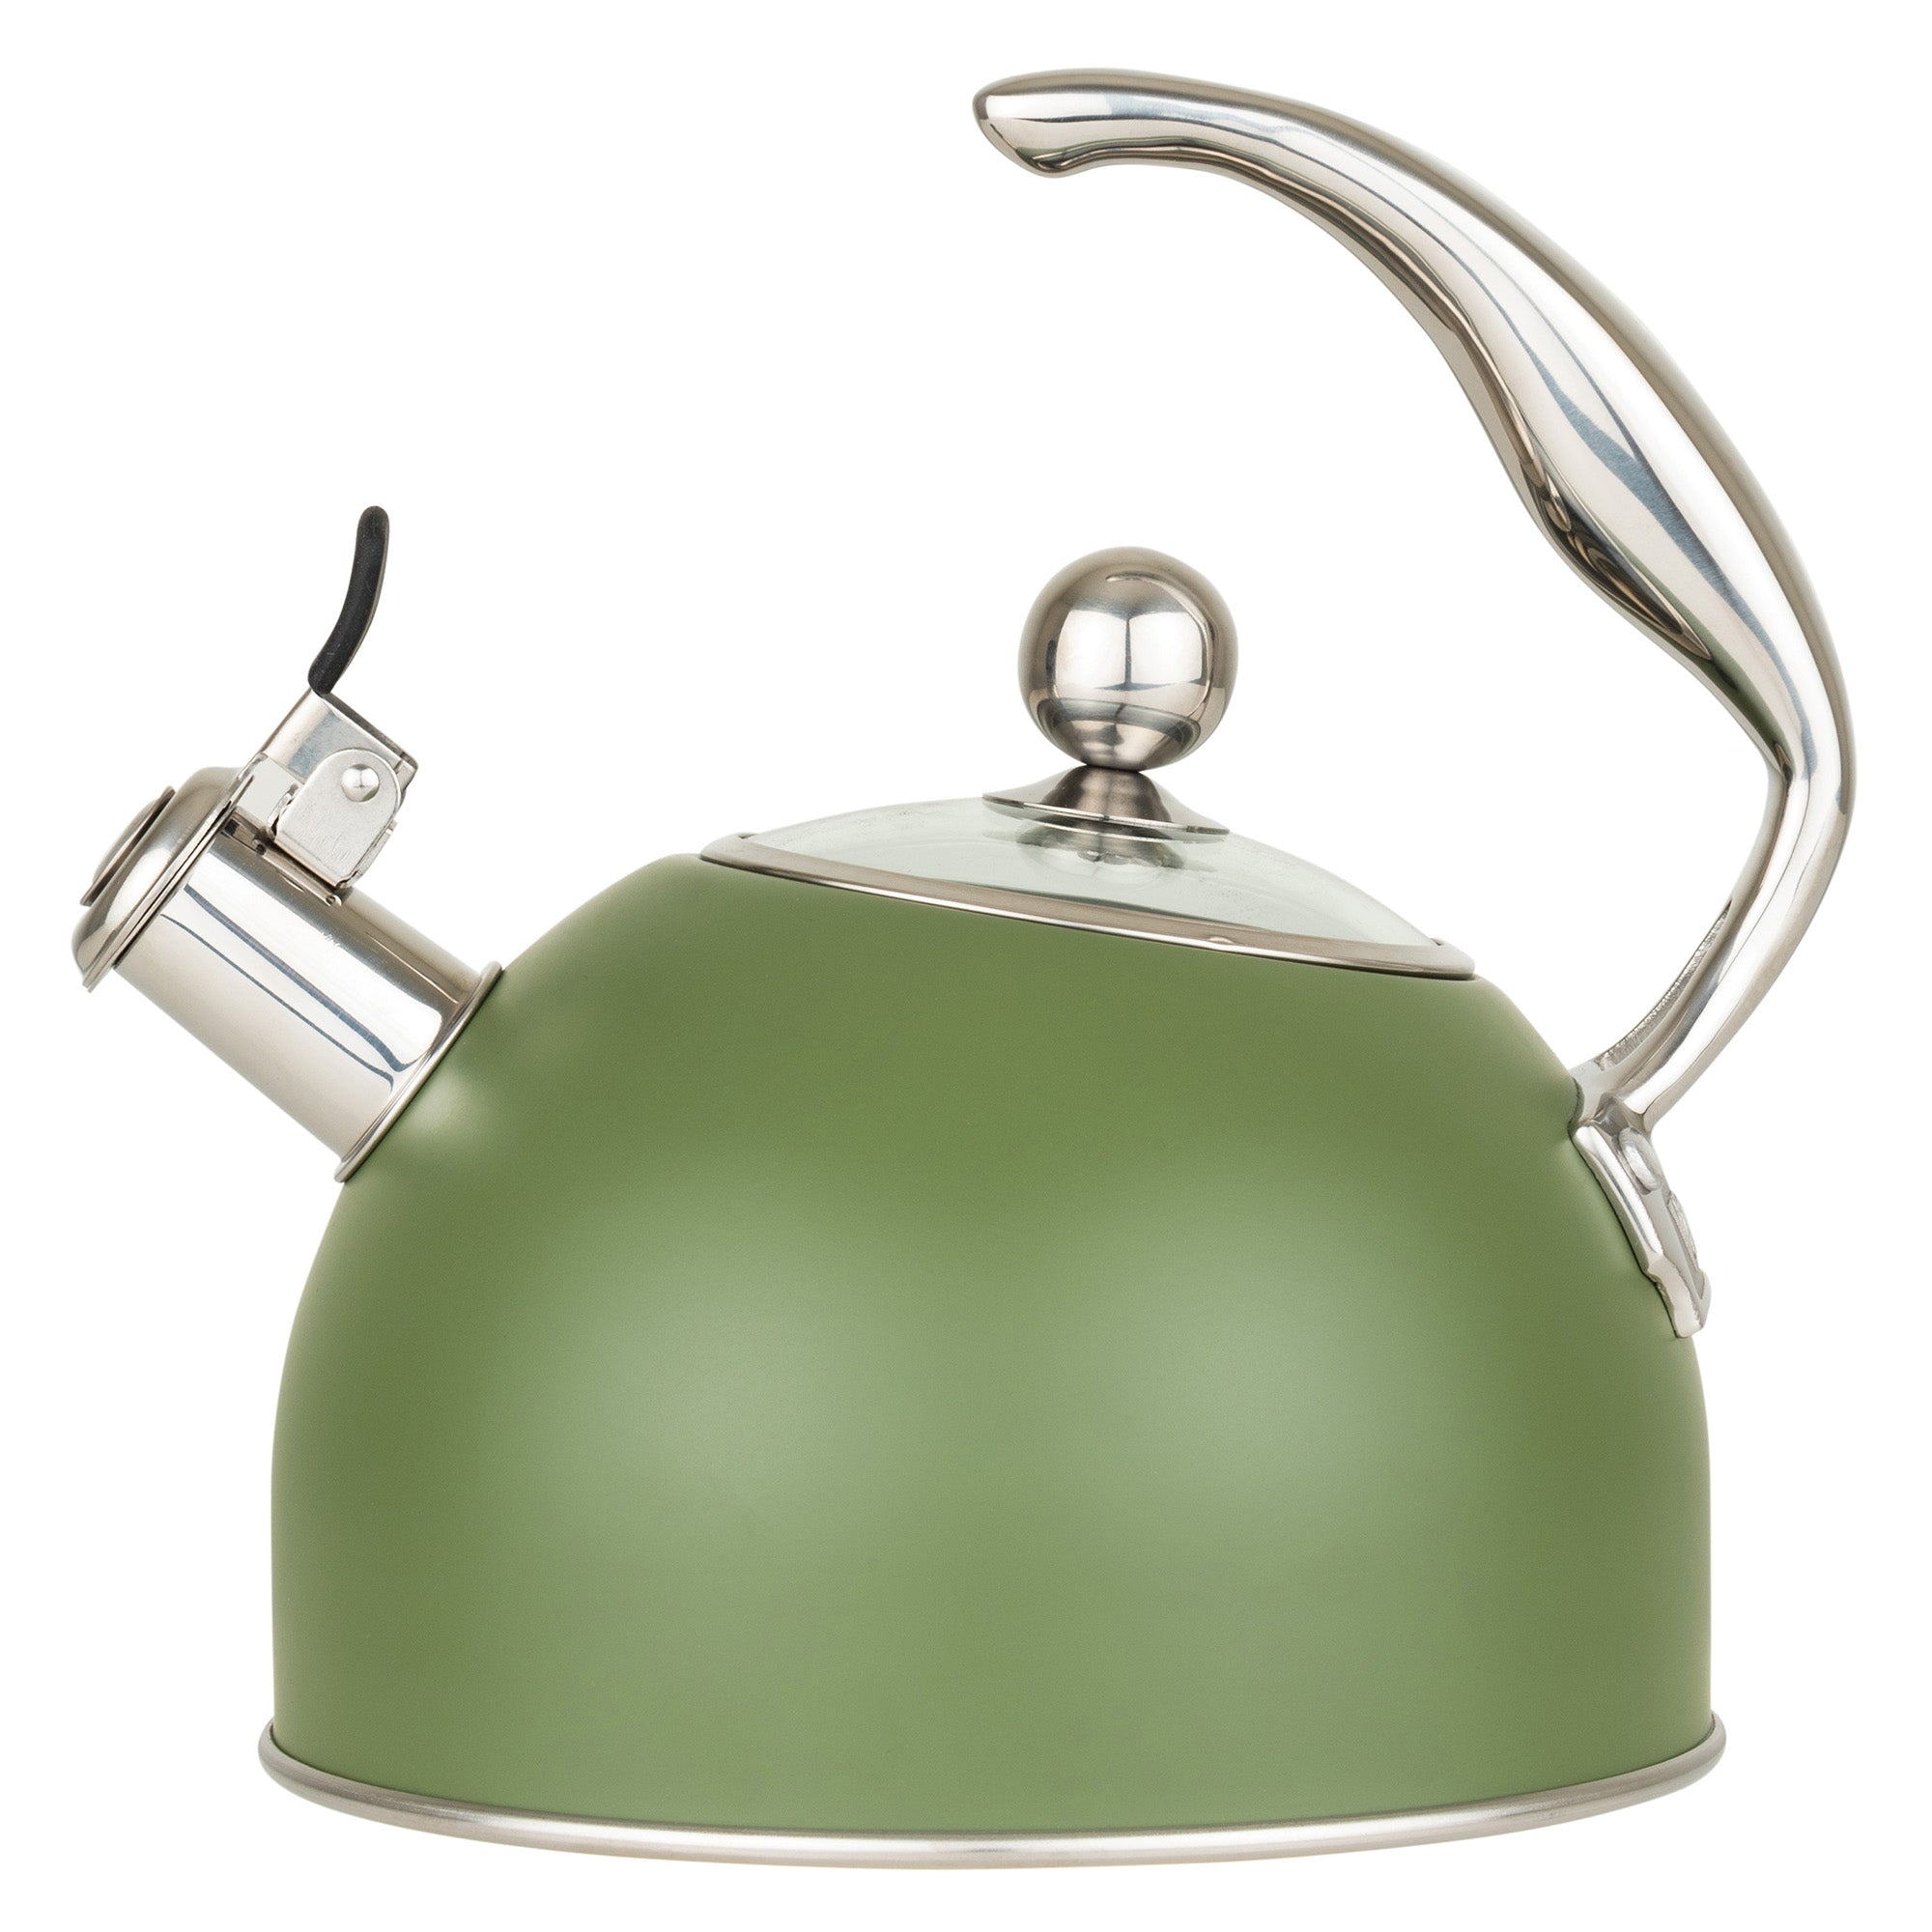 Which colors will be added to the Viking tea kettles line? You